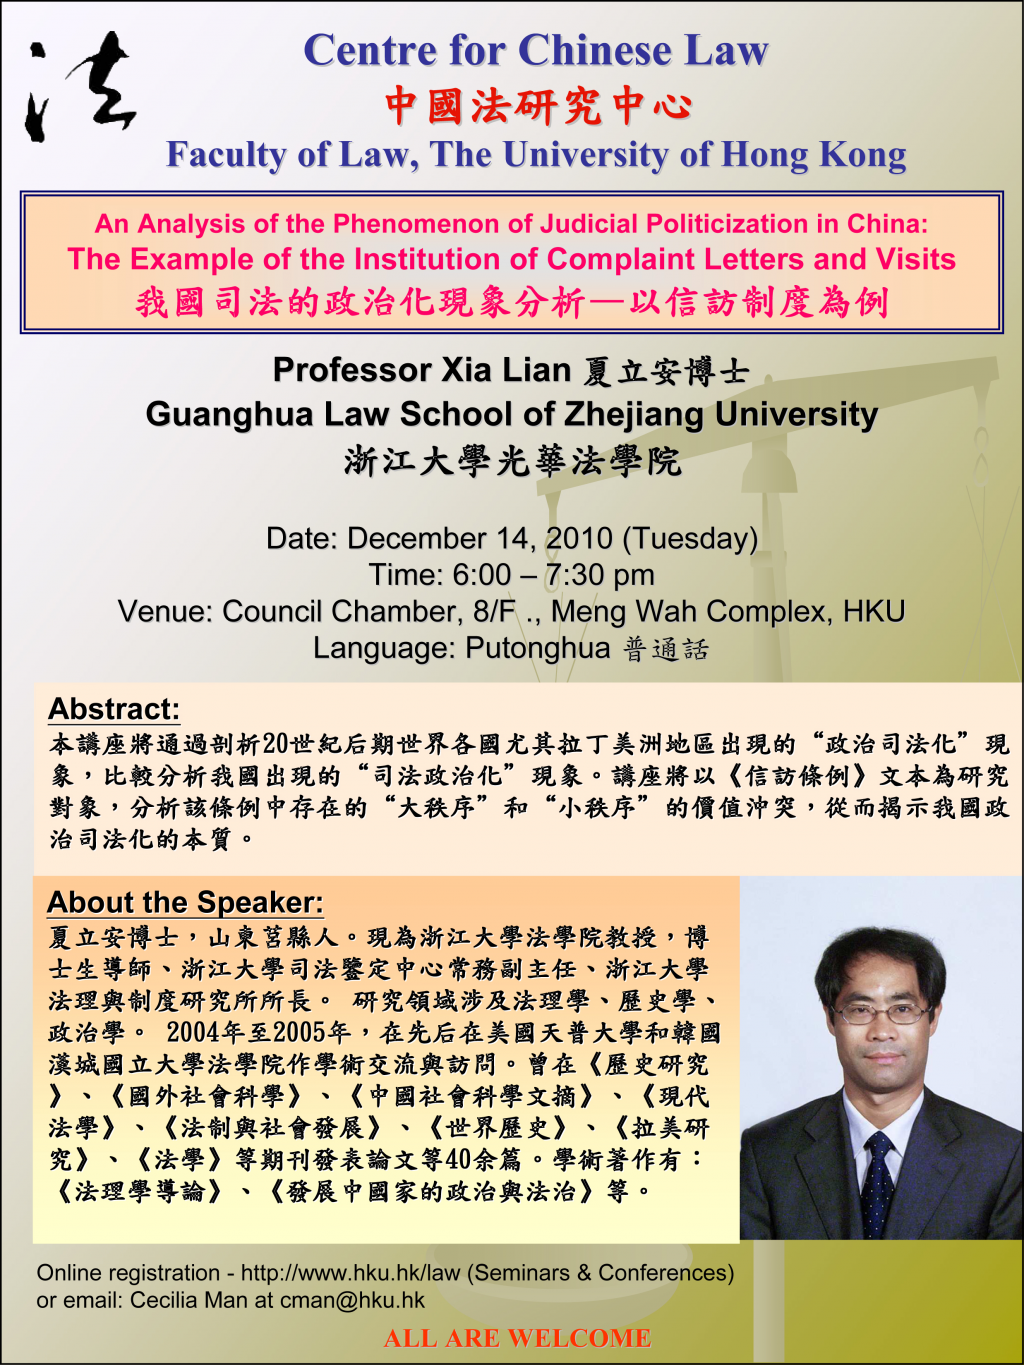 An Analysis of the Phenomenon of Judicial Politicization in China